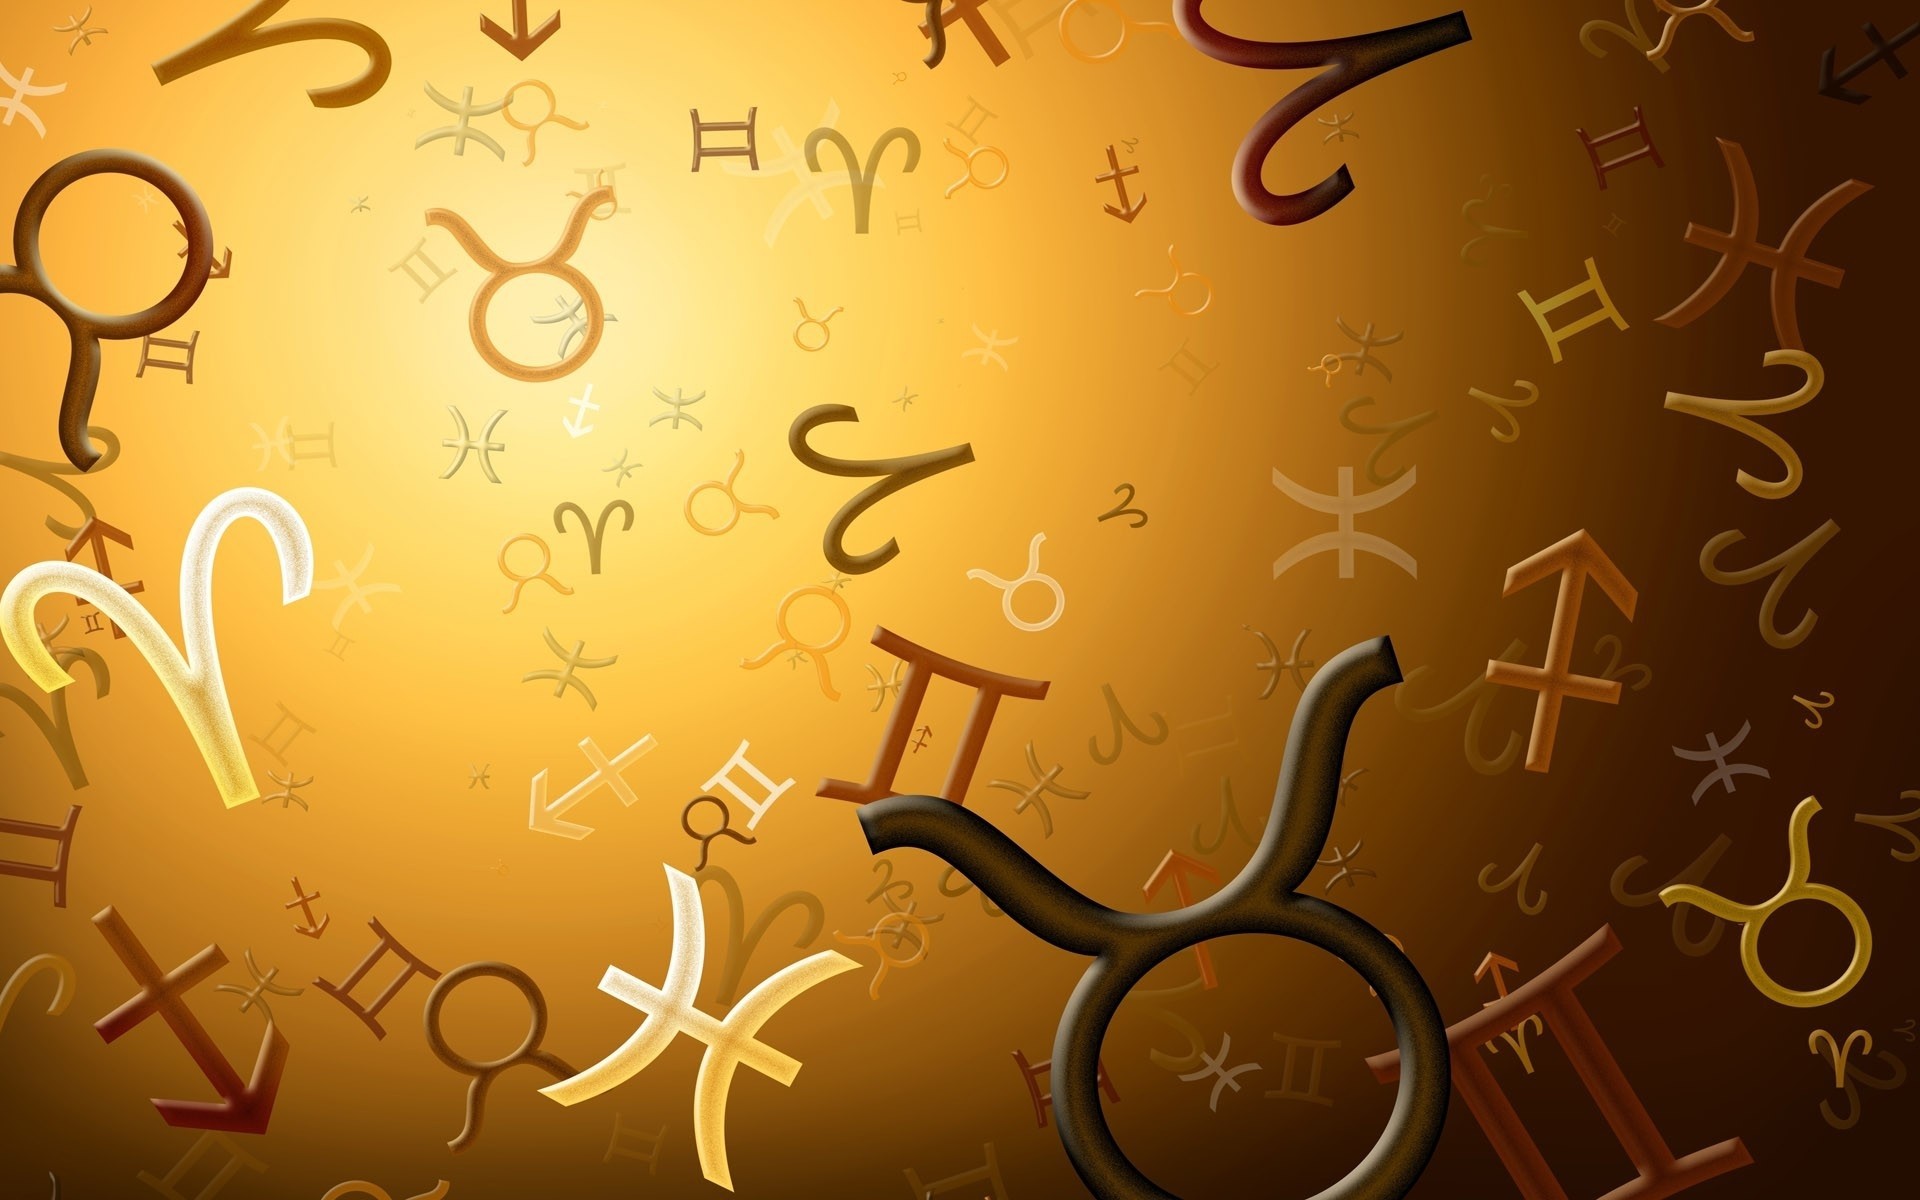 Zodiac Signs wallpapers and images - wallpapers, pictures, photos